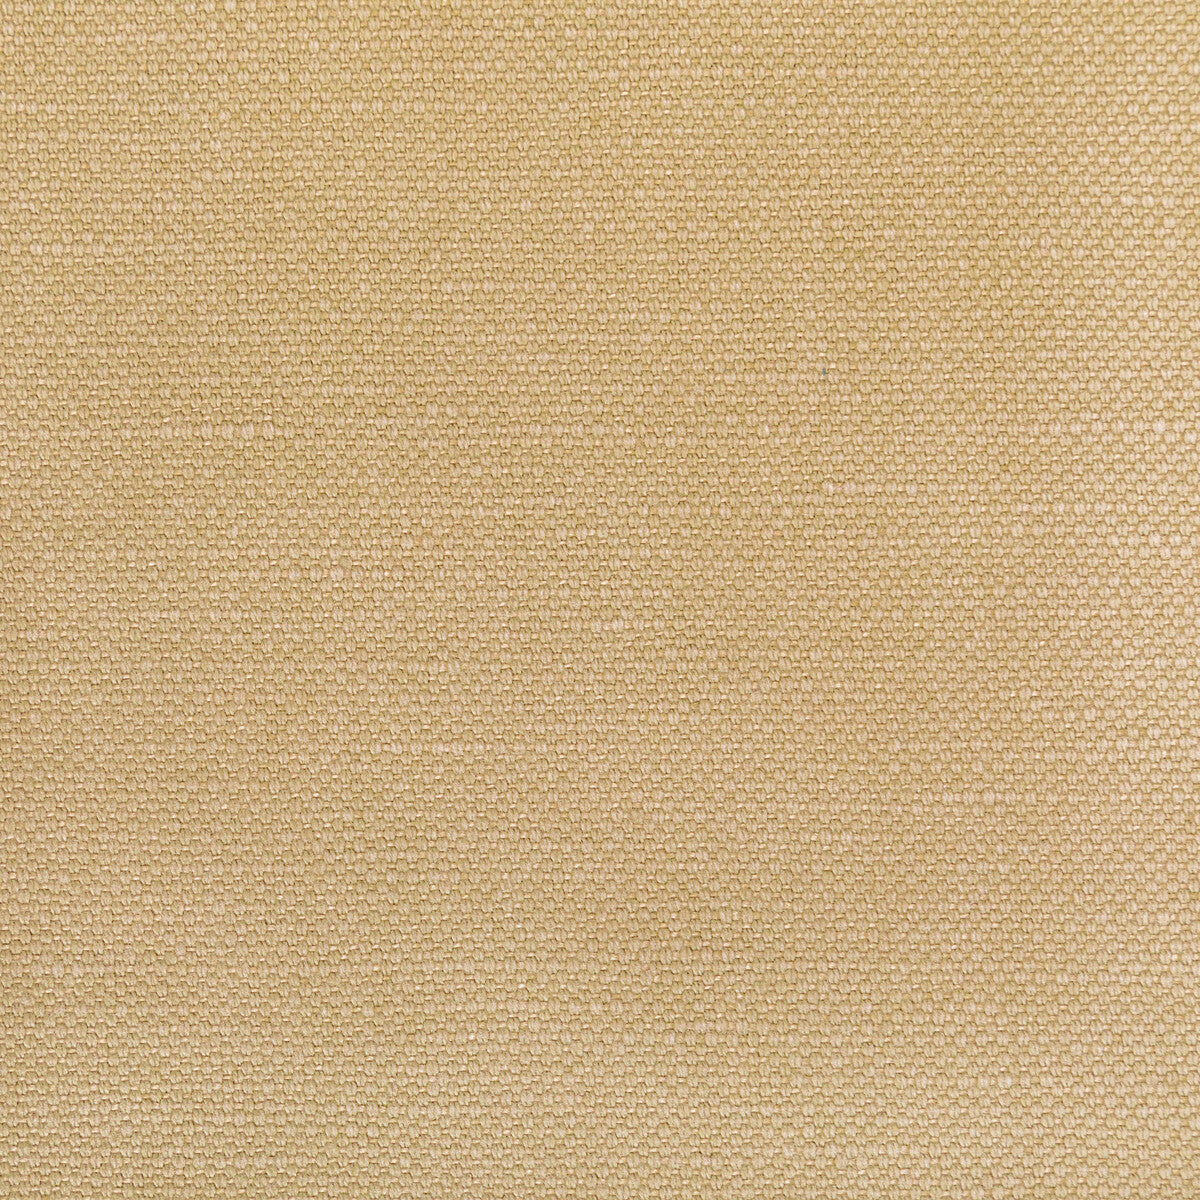 Carson fabric in tussah color - pattern 36282.1614.0 - by Kravet Basics